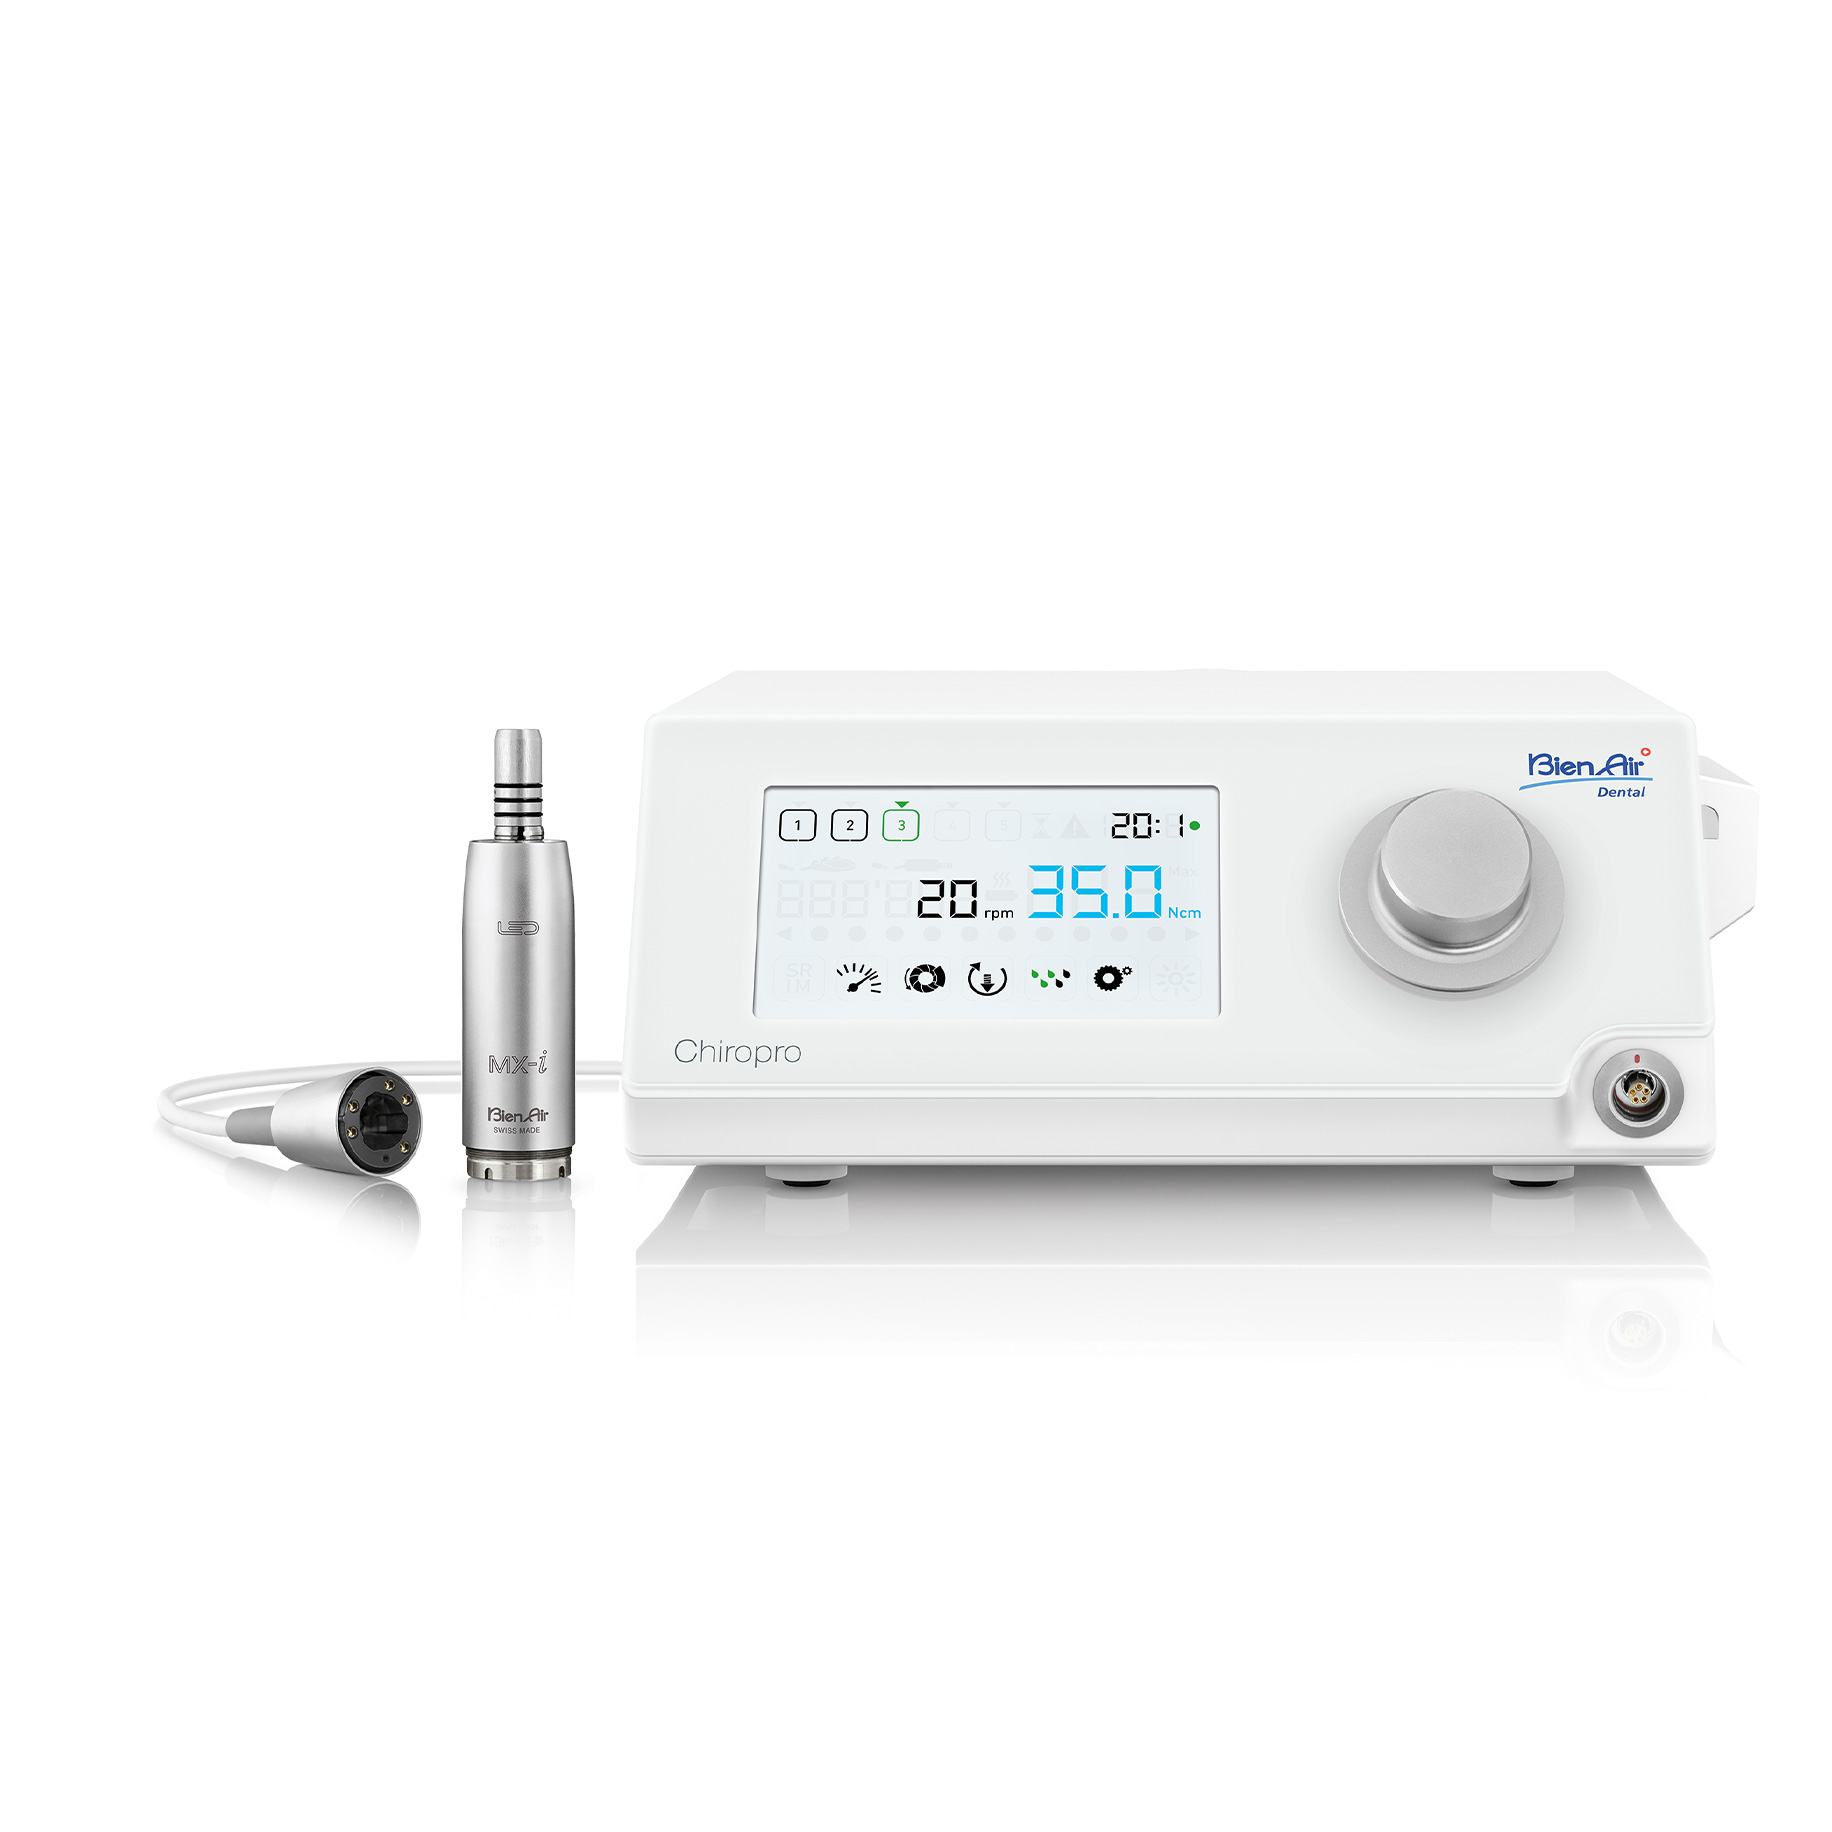 Set Chiropro 3rd Generation Surgical 